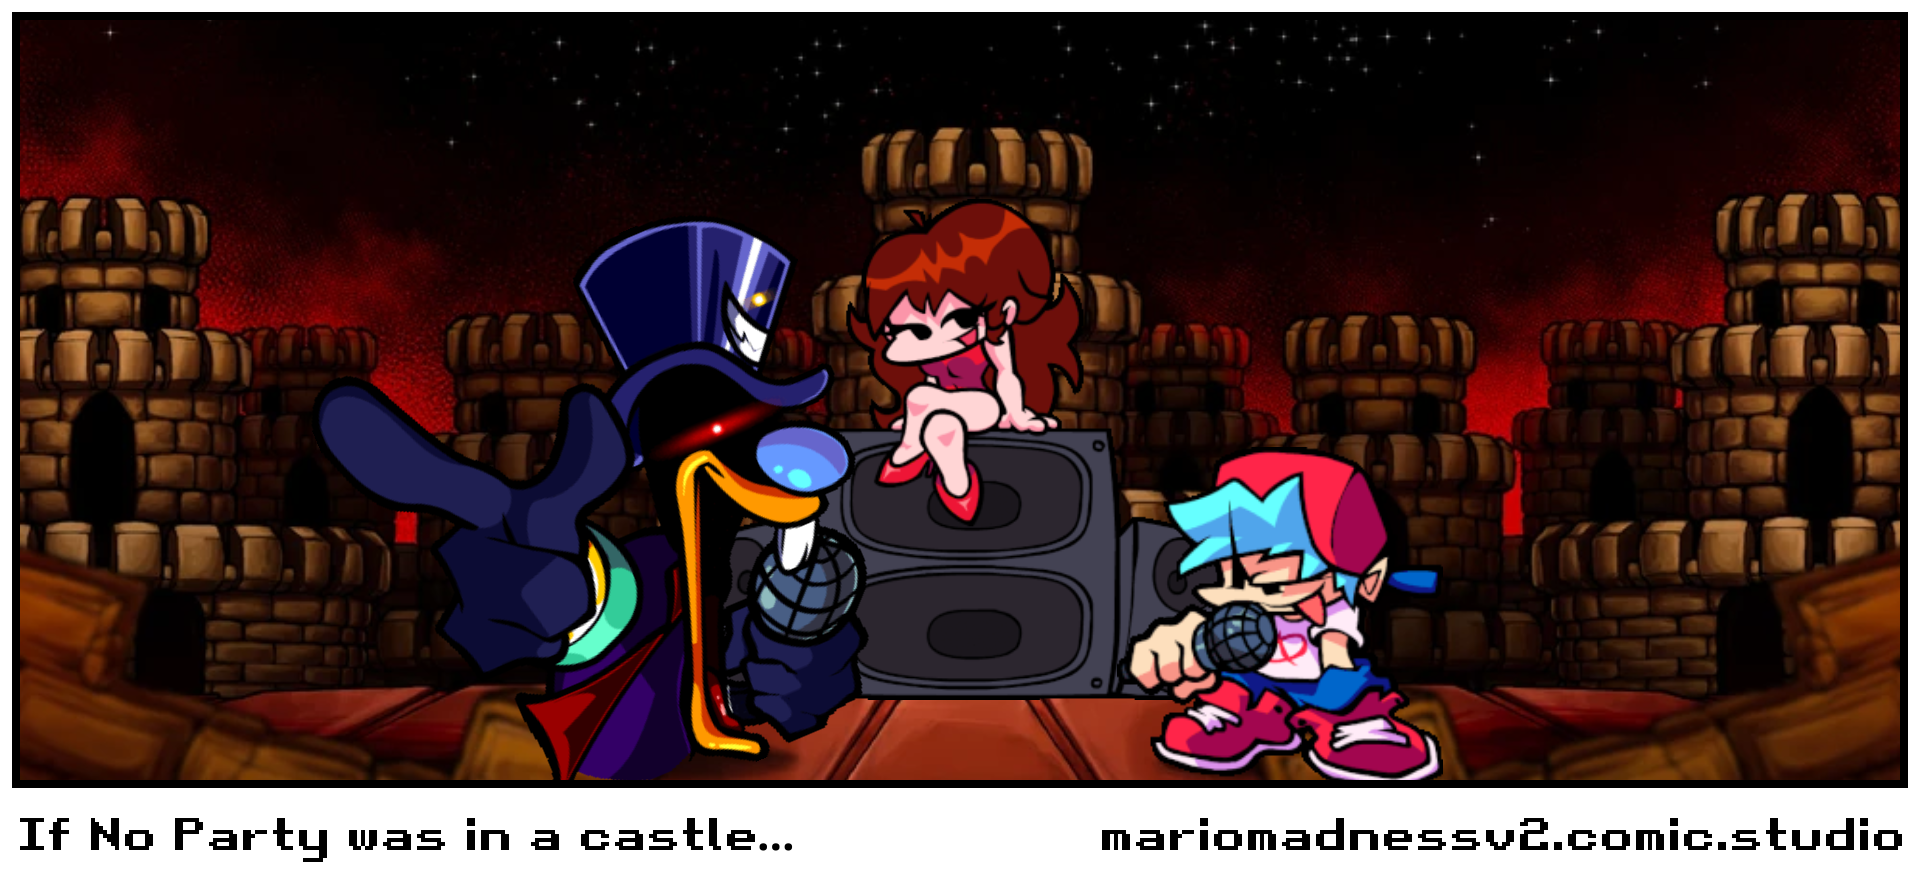 If No Party was in a castle…